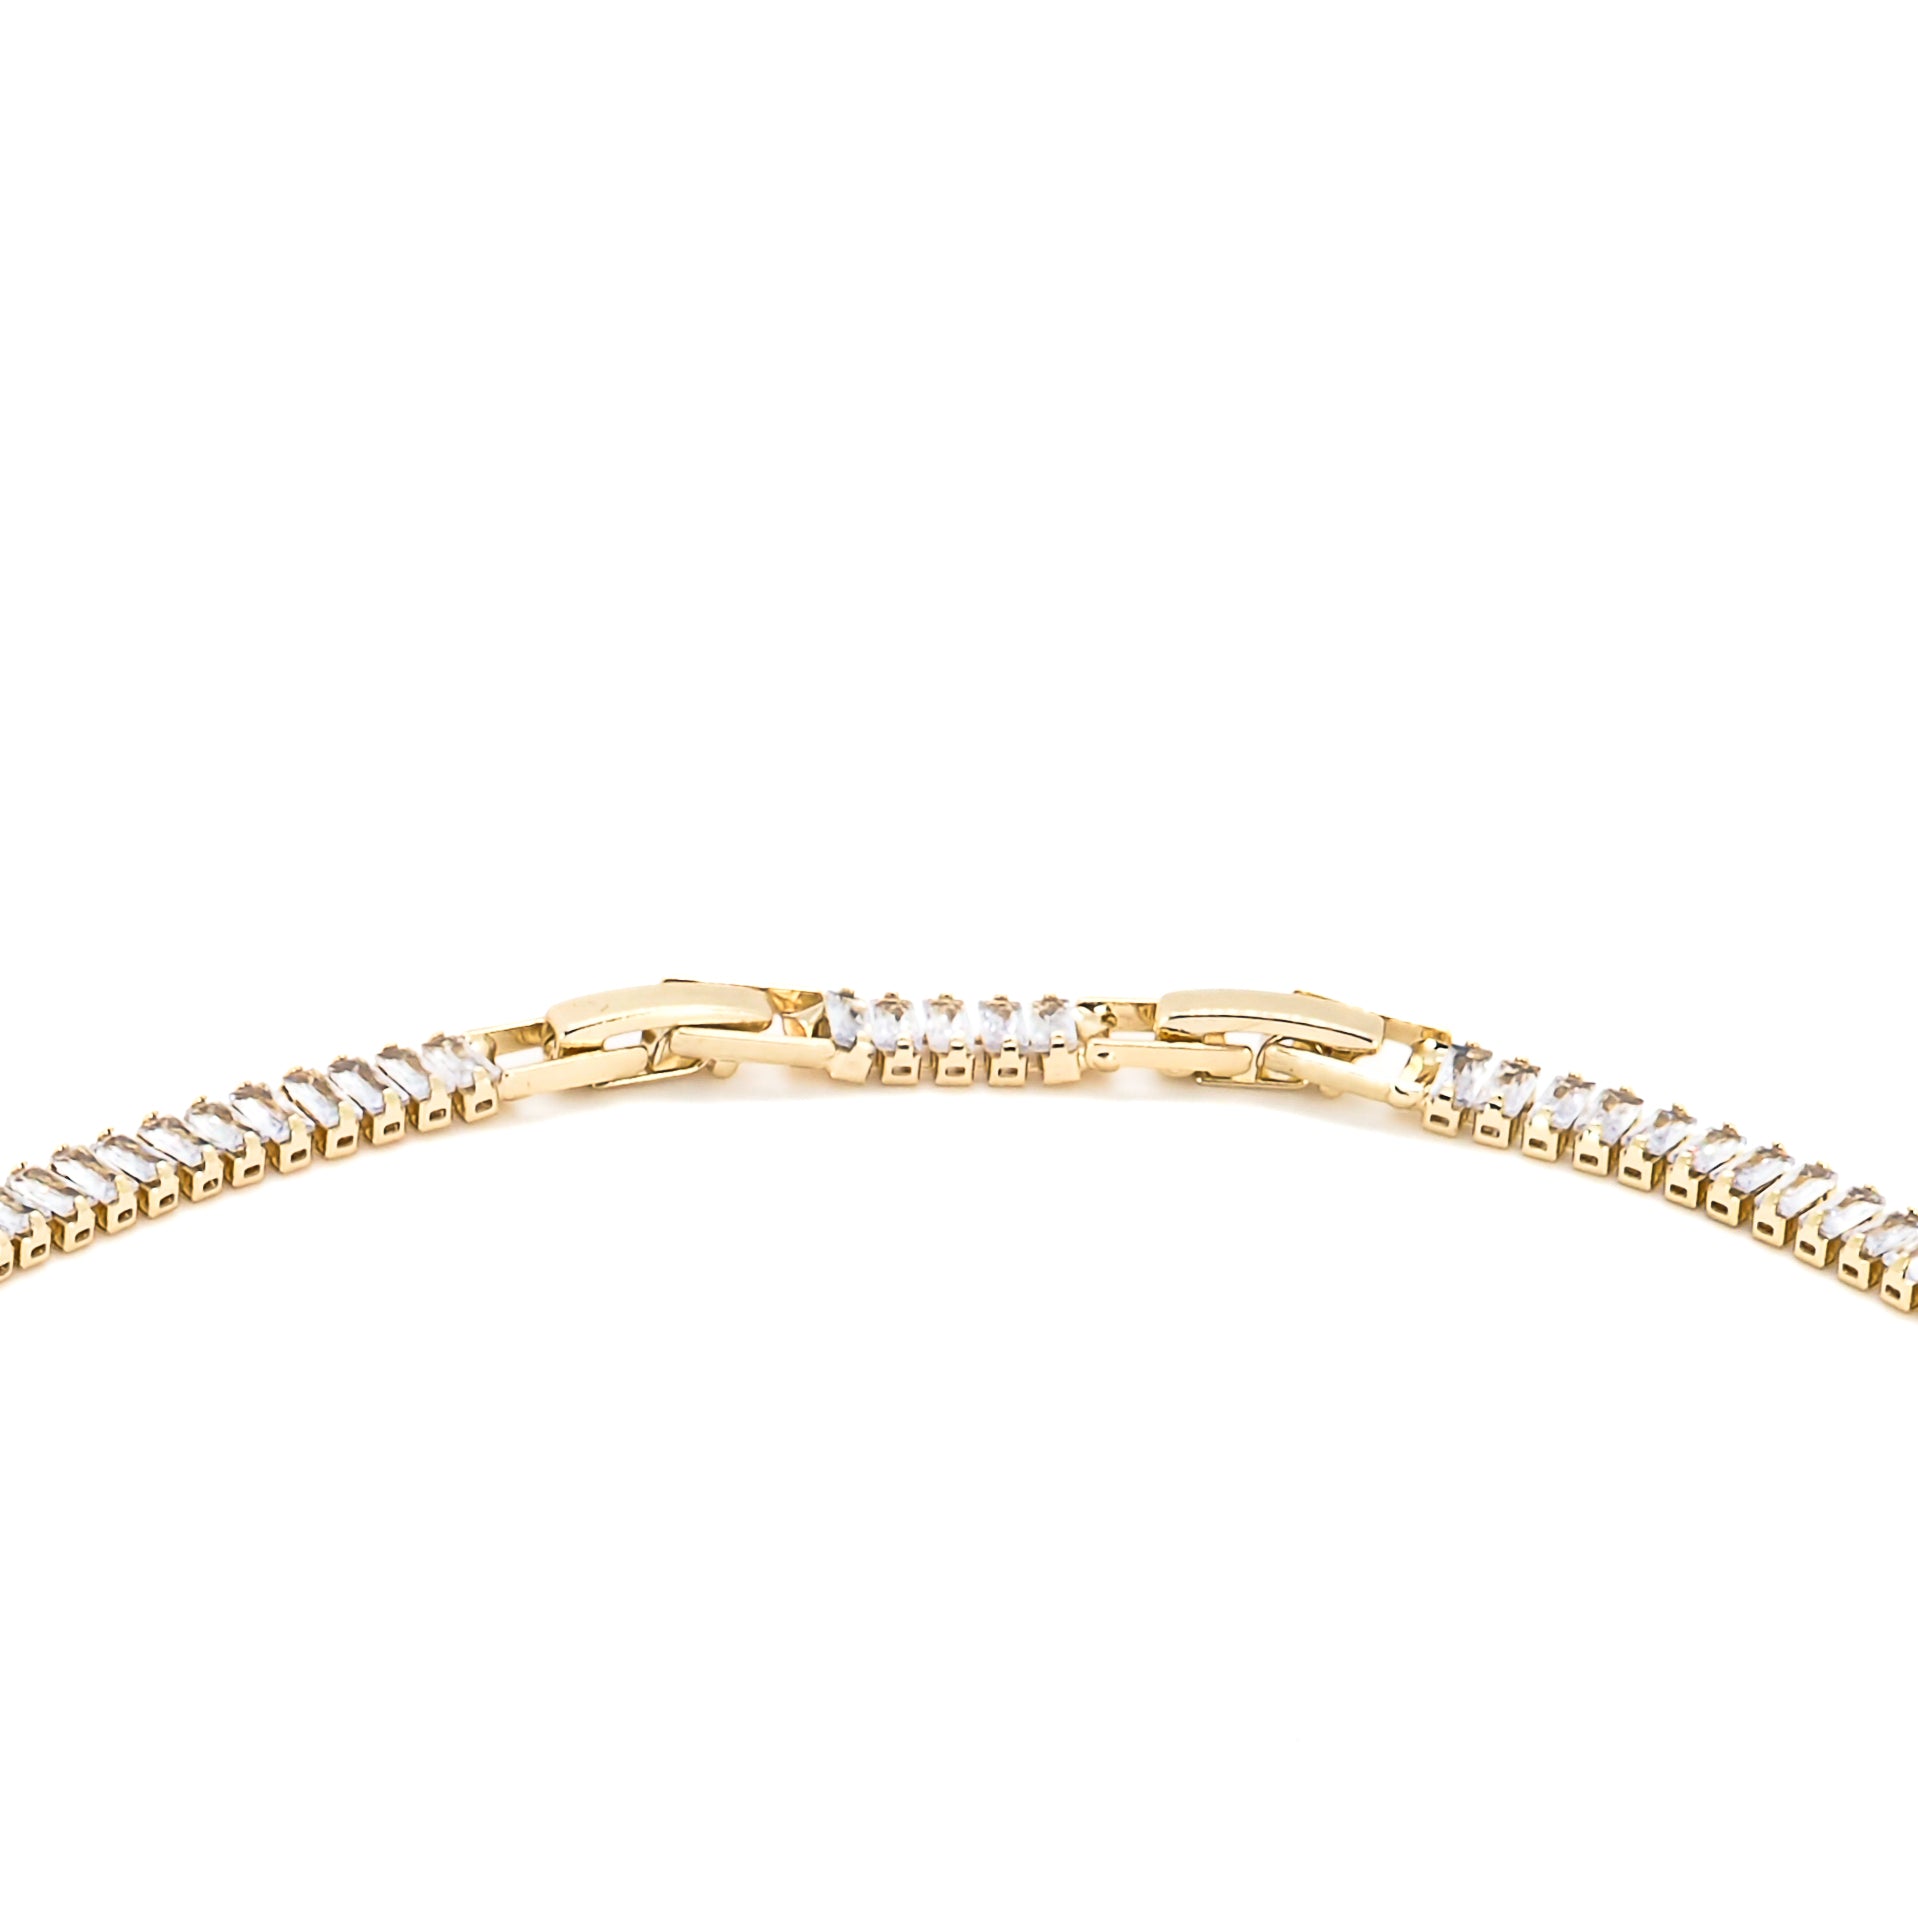 Baguette Diamond Gold Choker Necklace on a model, radiating confidence in the stunning gold and diamond accessory.